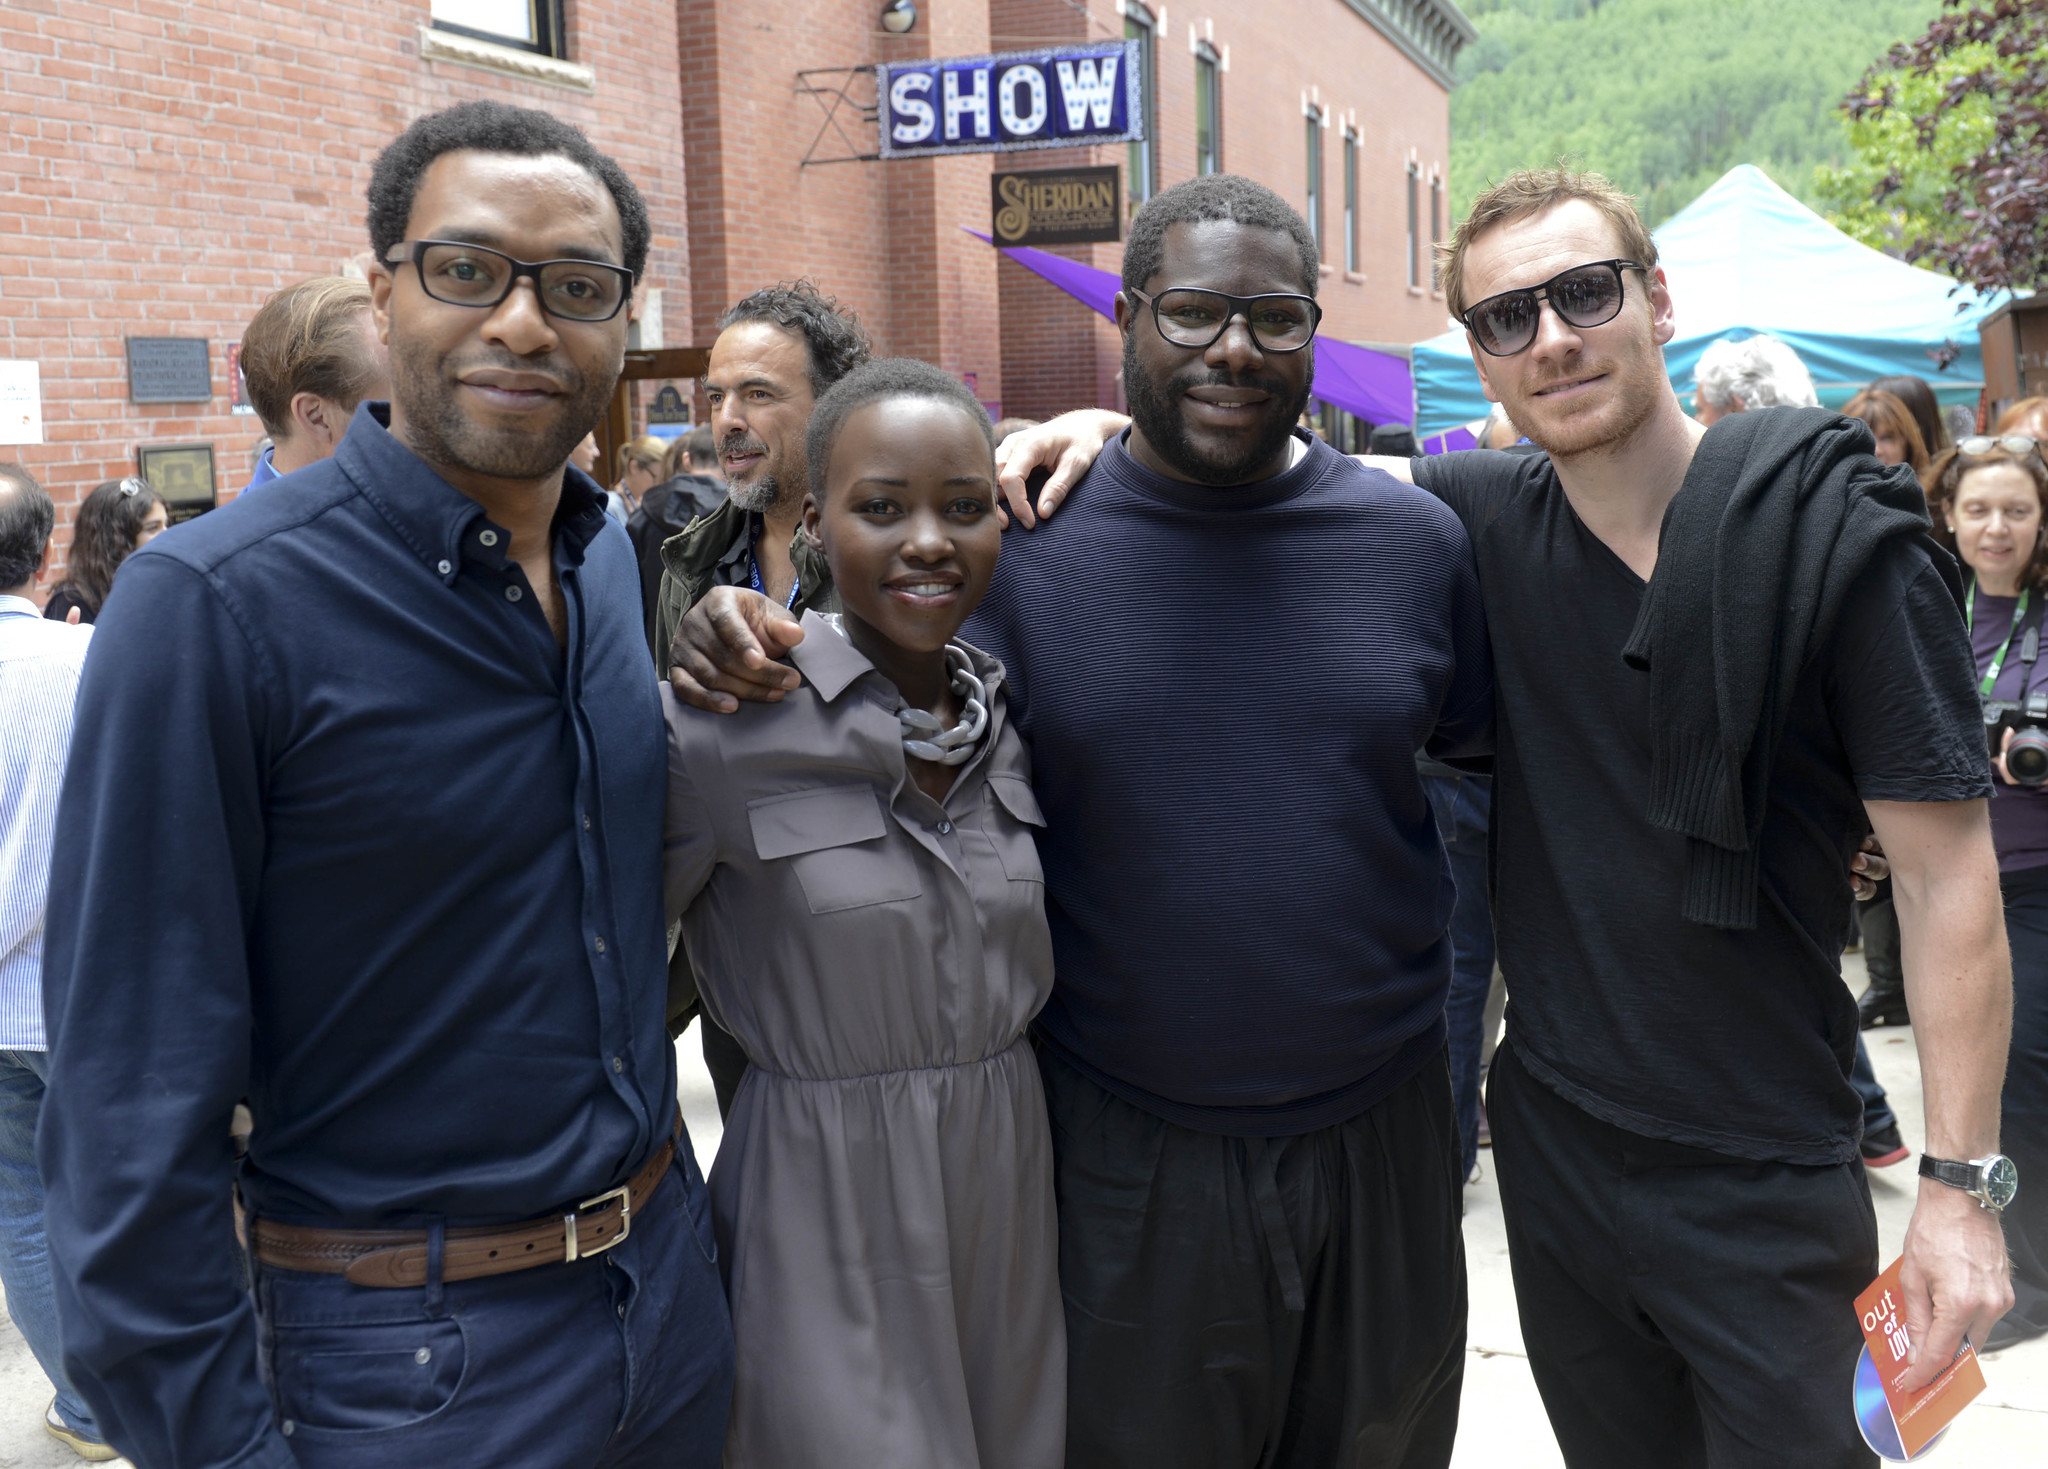 Chiwetel Ejiofor, Michael Fassbender, Lupita Nyong'o and Steve McQueen at event of 12 vergoves metu (2013)